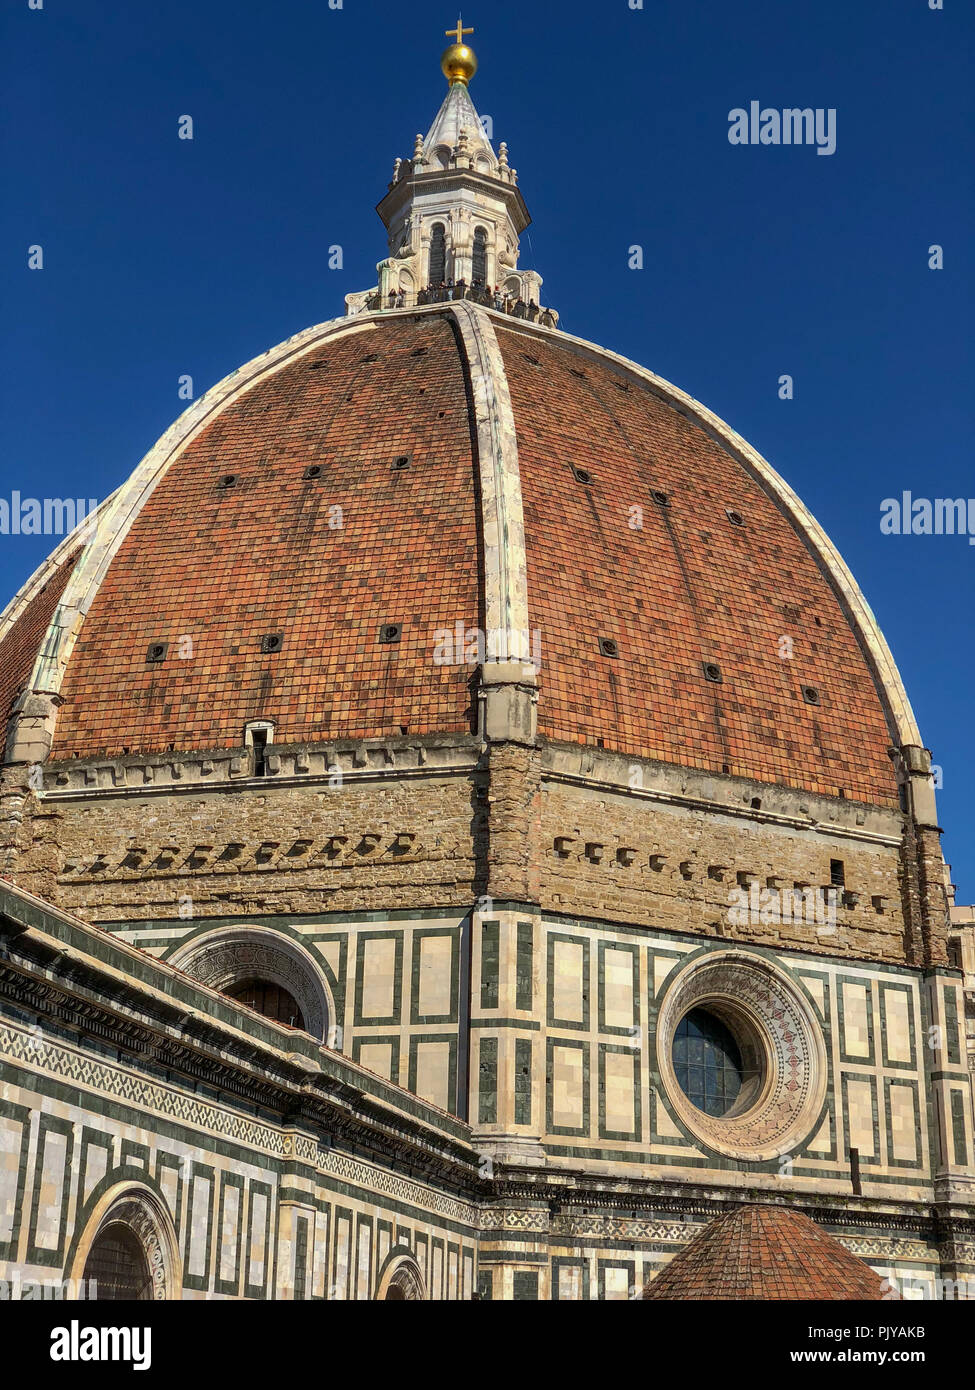 Florence Duomo. Basilica di Santa Maria del Fiore (Basilica of Saint Mary of the Flower) in Florence, Italy. Stock Photo